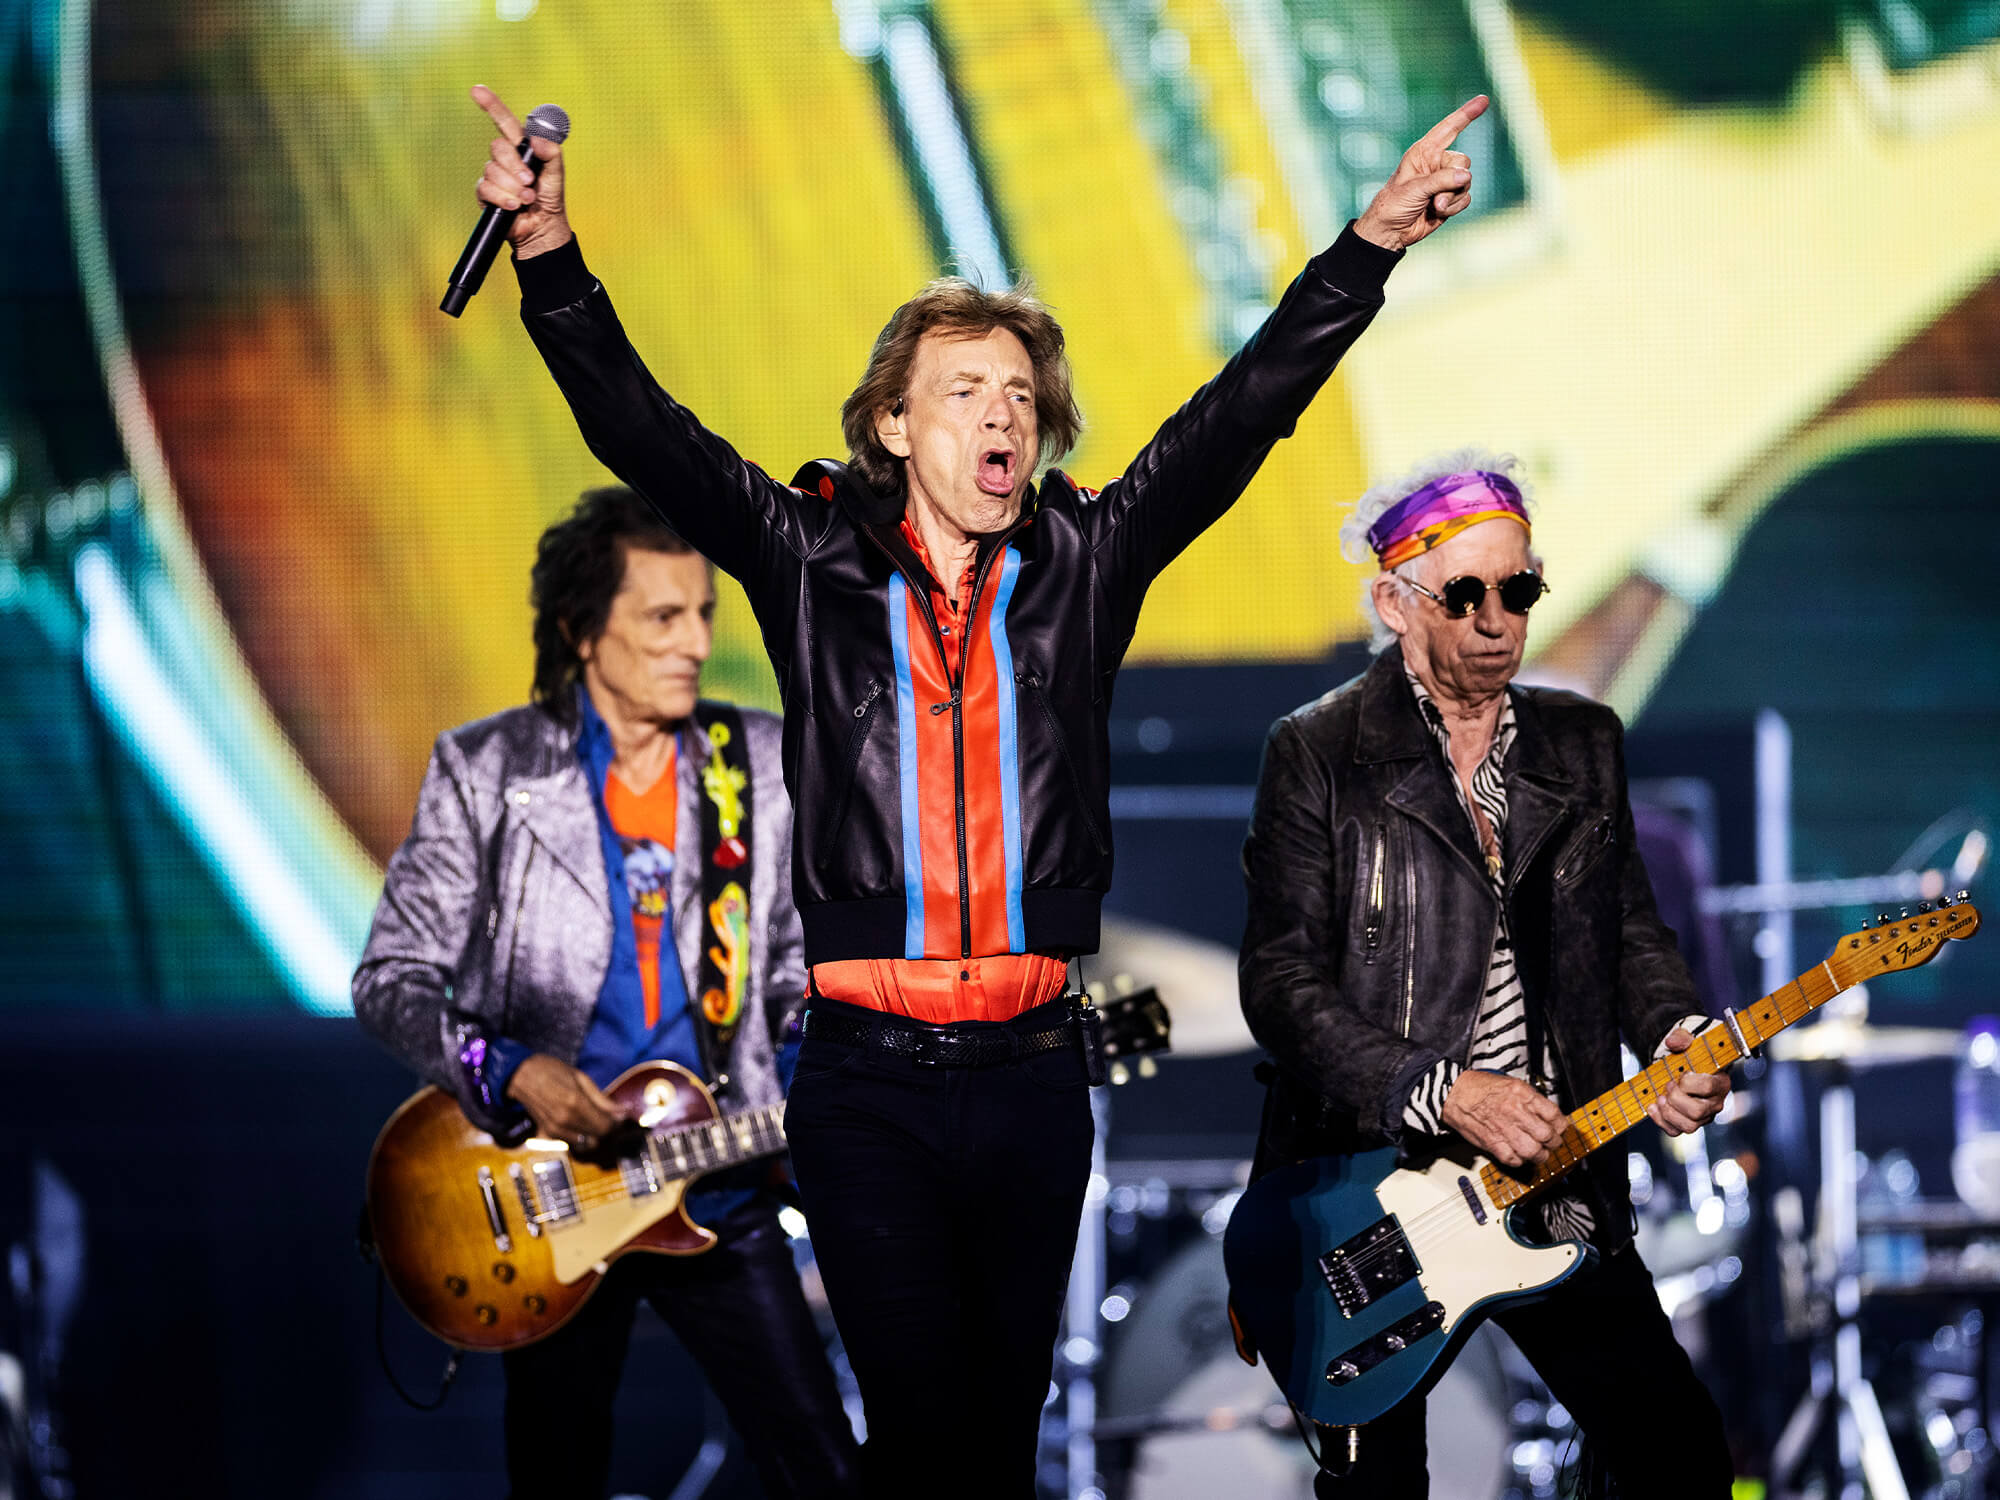 The Rolling Stones on stage. Mick Jagger has both hands in the air with an open-mouthed expression.